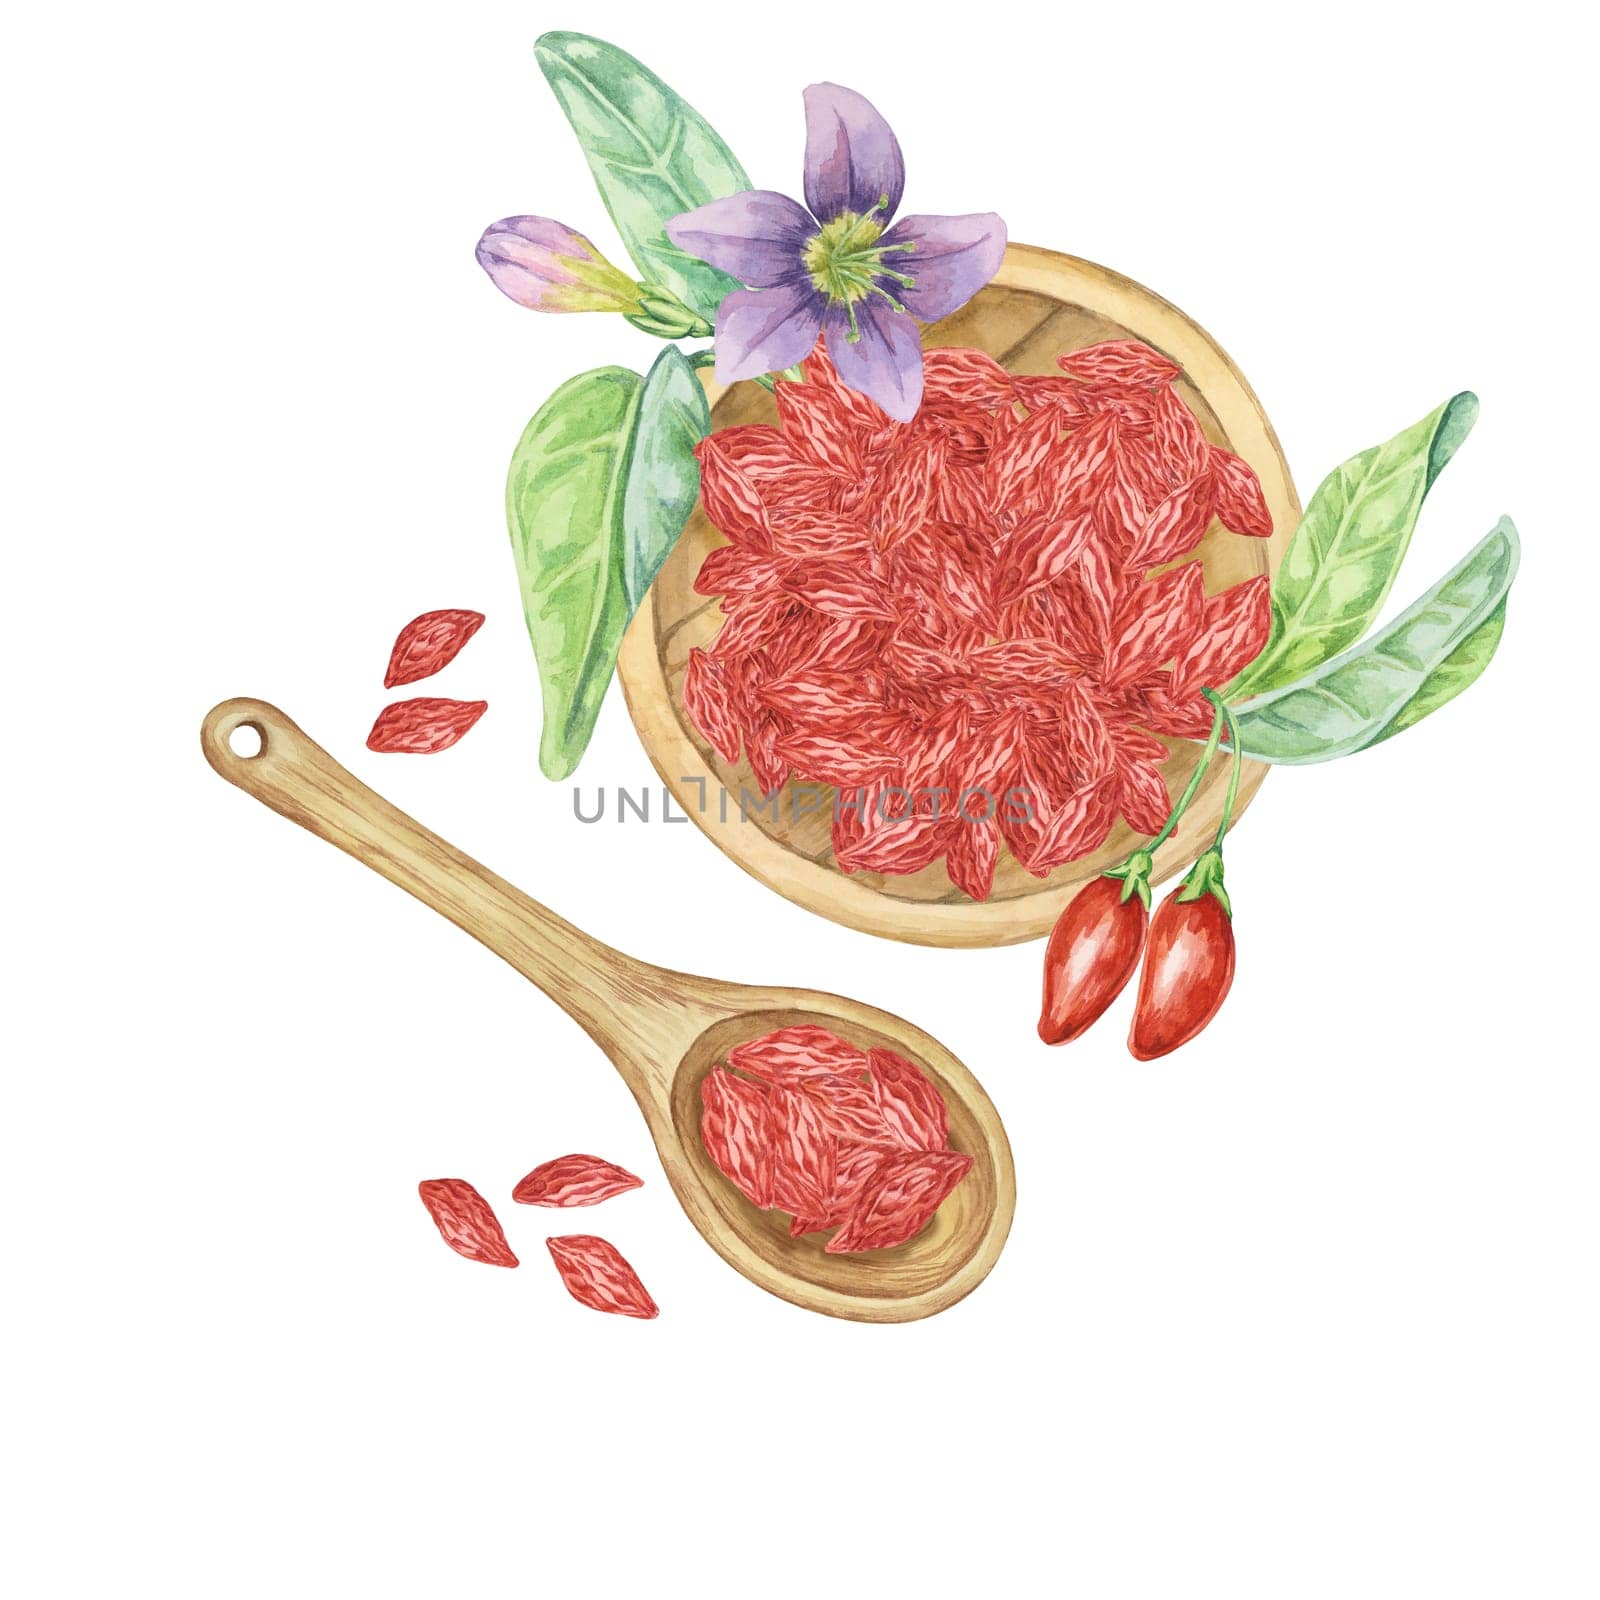 Wooden spoon and plate with dry and fresh goji berries. Hand-drawn watercolor clipart of superfood licium barbarum fruits. Design for printing, packaging, cards, food supplements isolated on white.